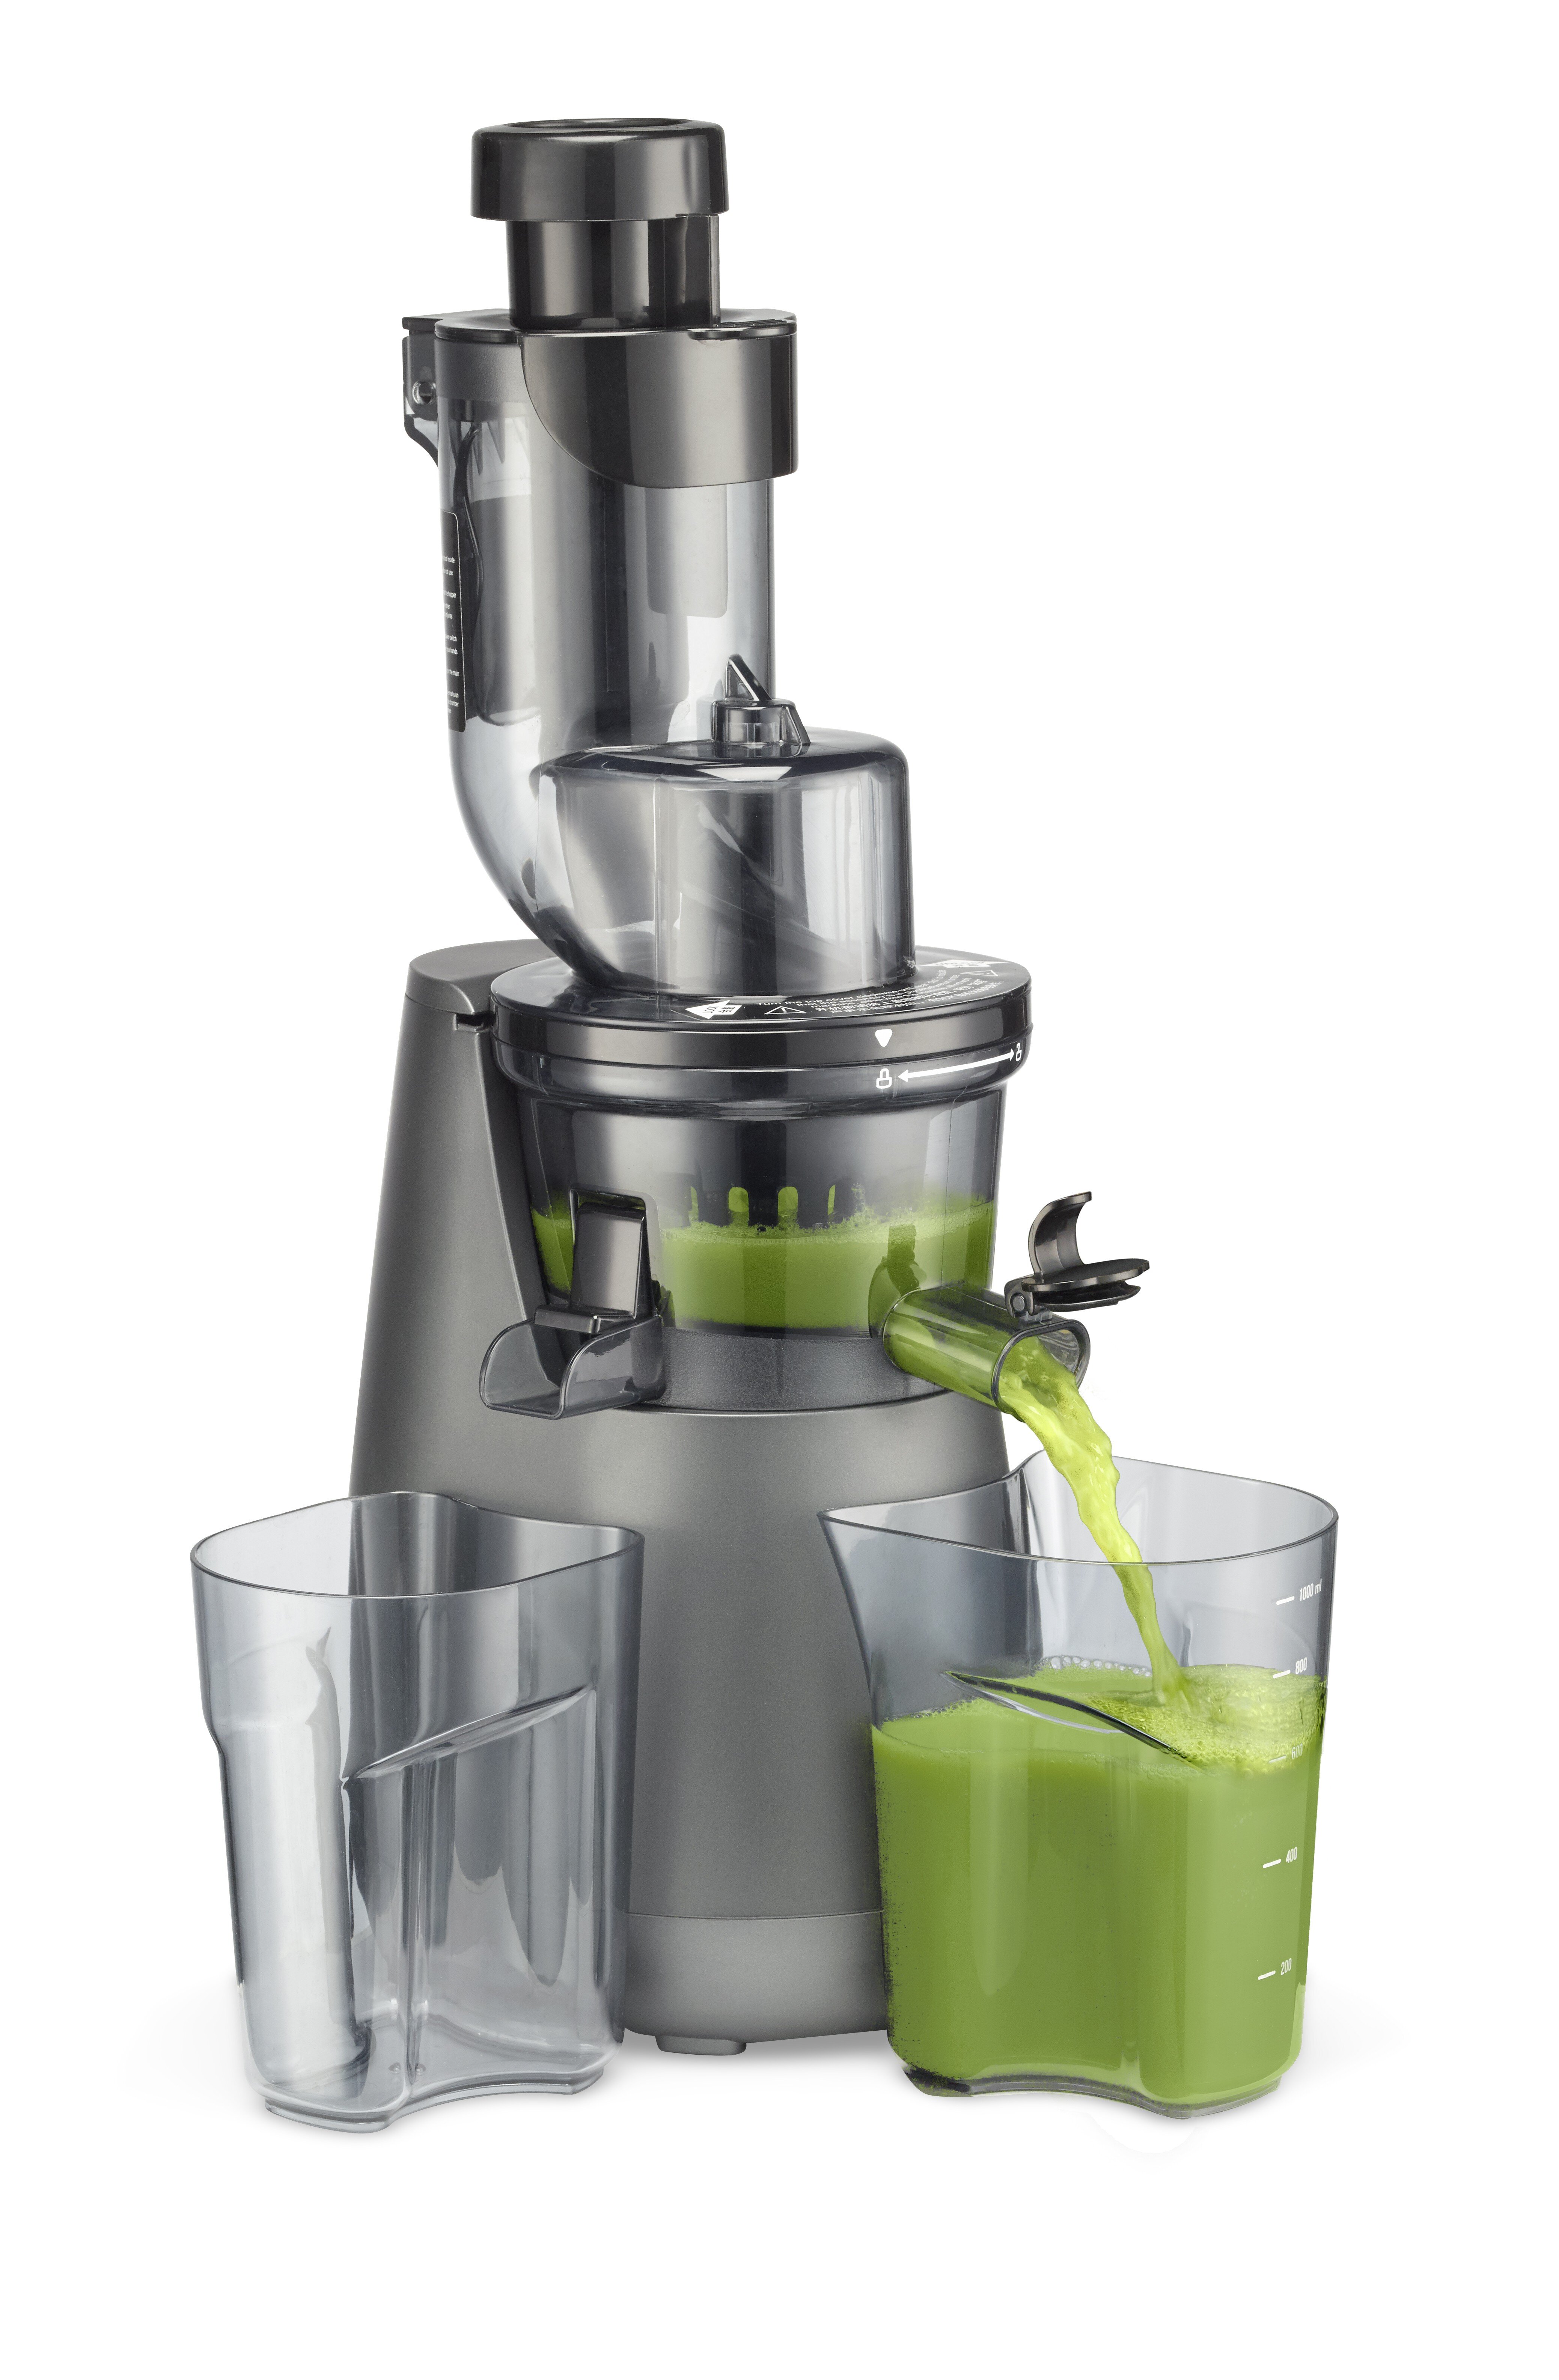 Includes a 99.99% Pulp Free Strainer Quiet 200 W Motor TEC Slow Masticating Juicer Portable Compact Lightweight Cold Press Juicer; Easy to Set Up & Clean; Plus a Powerful 